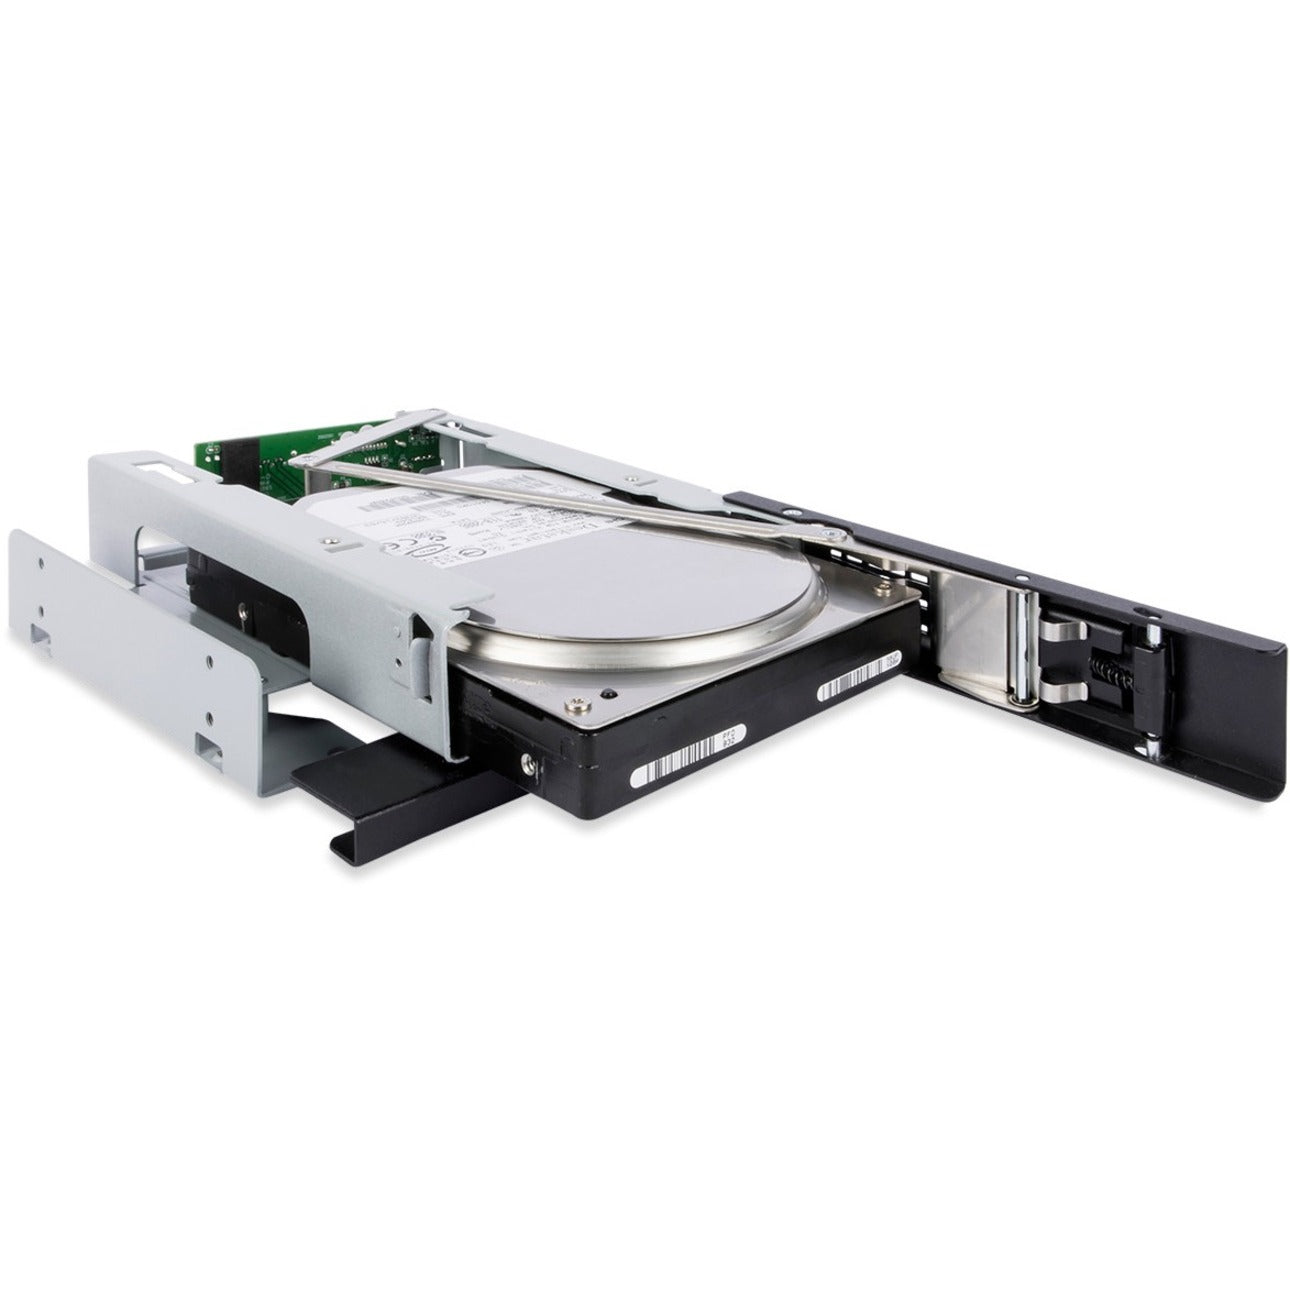 Icy Dock TurboSwap MB171SP-1B Drive Bay Adapter for 5.25" SATA Serial Attached SCSI (SAS) - SATA Host Interface External - Black